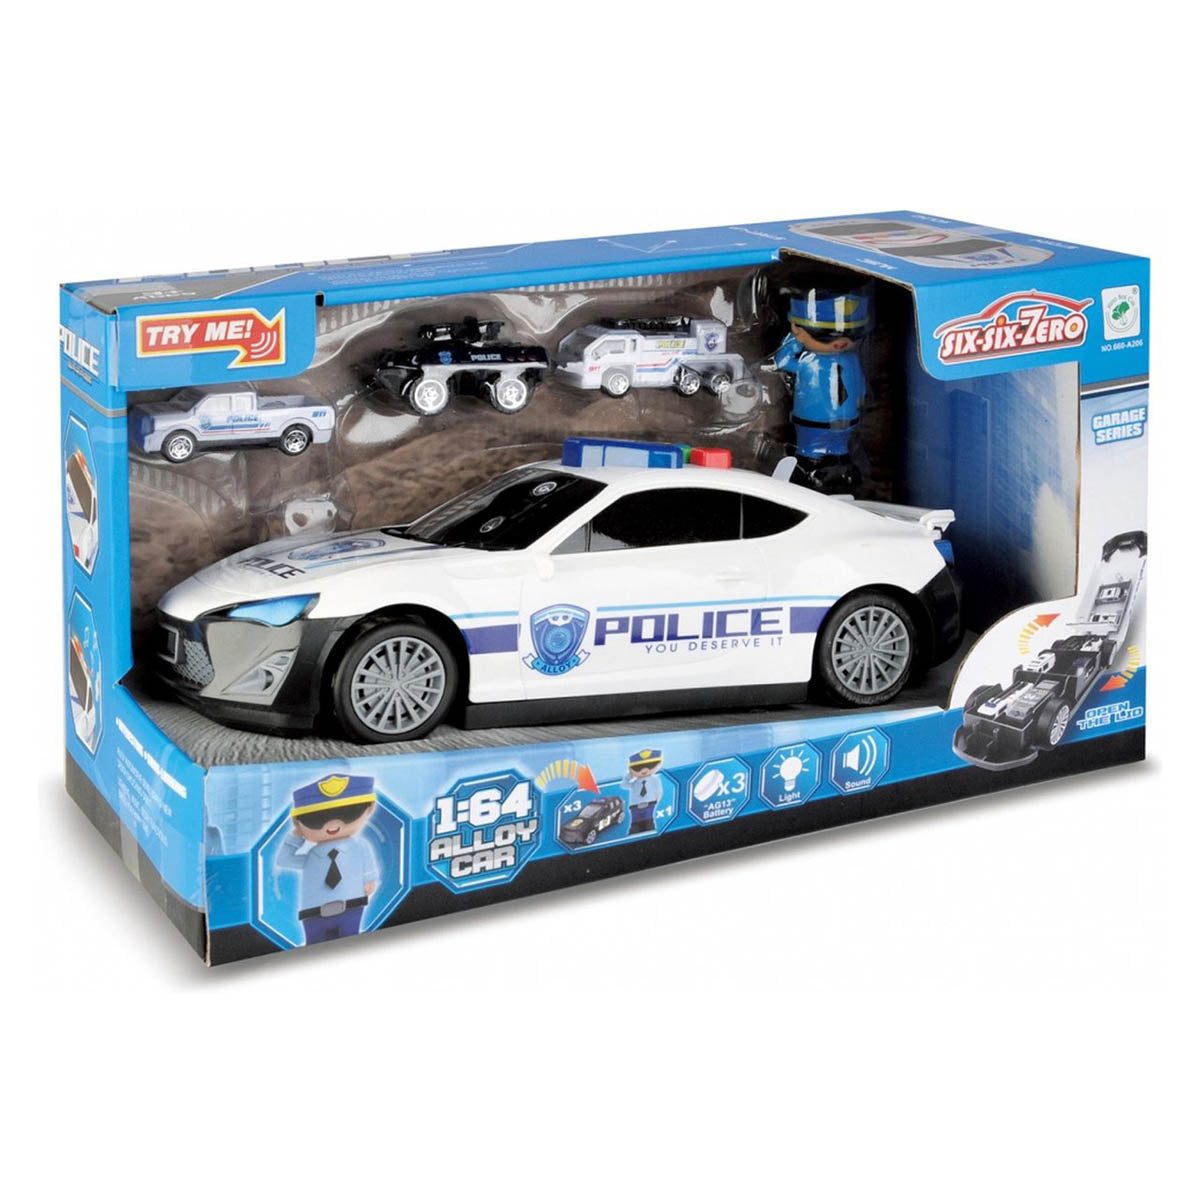 <tc>Ariko</tc> XL police car set - no less than 1:64 - 3 extra cars - storage compartments in the car - policeman - with light and sound - including batteries